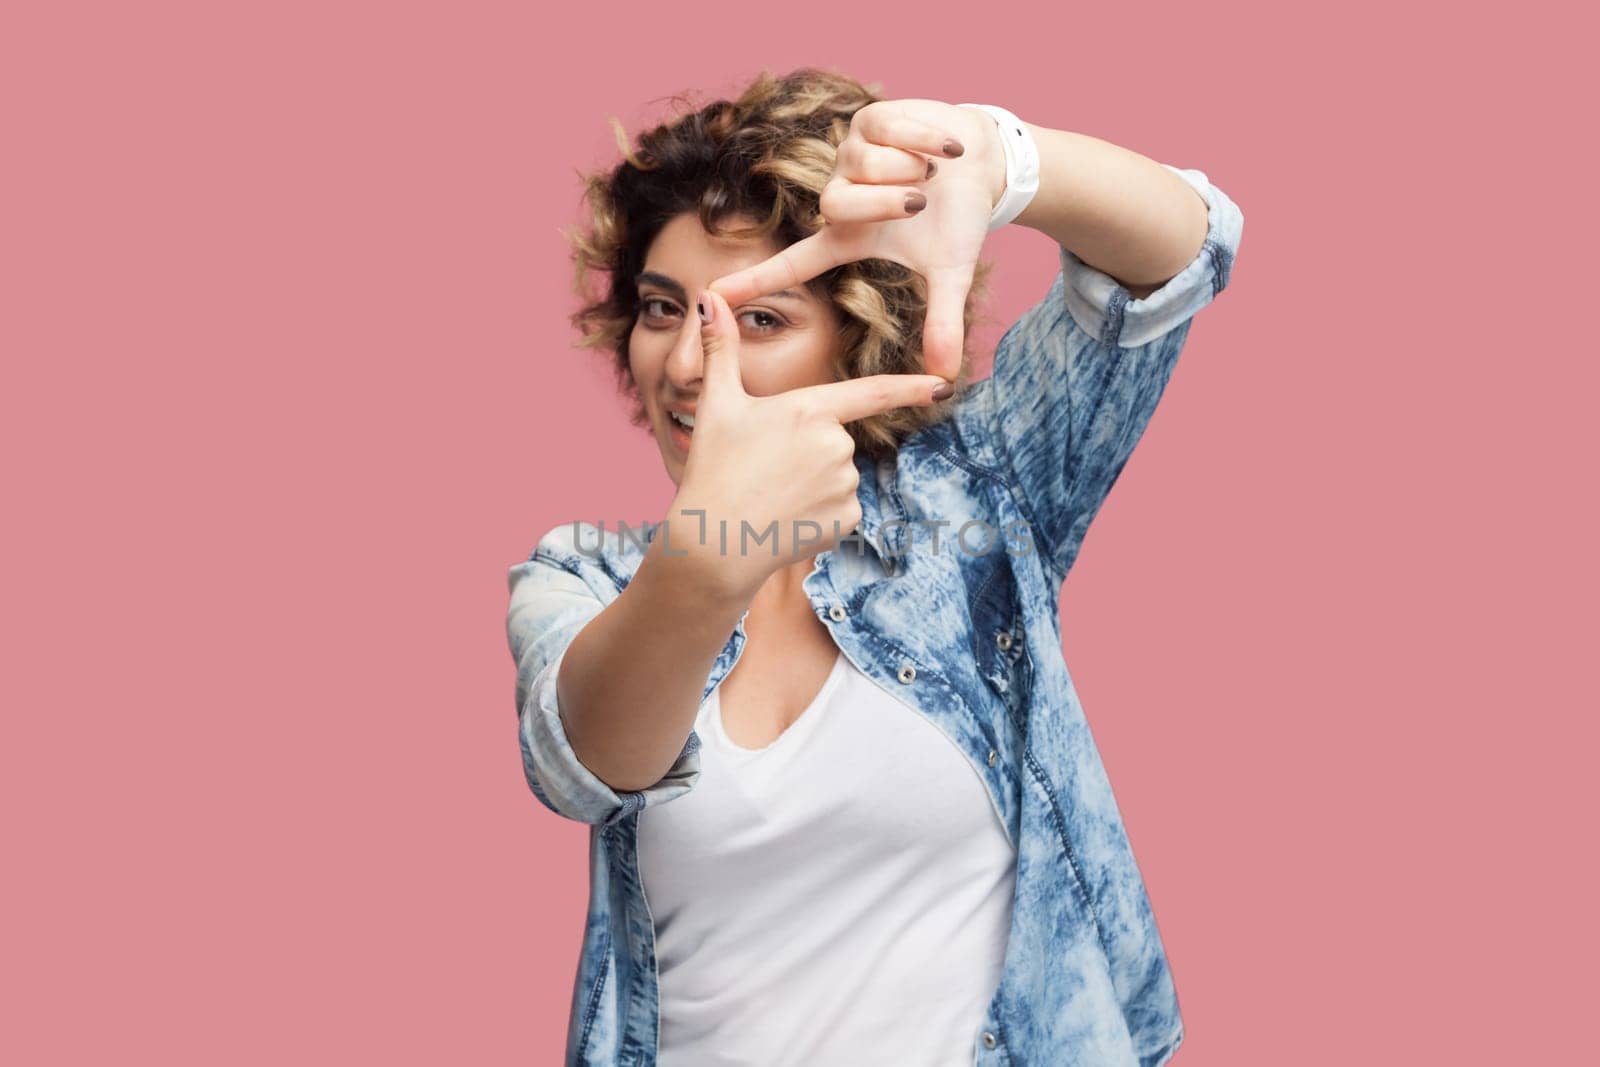 Portrait of concentrated attractive woman photographer with curly hairstyle wearing blue shirt standing looking at camera through frame of fingers. Indoor studio shot isolated on pink background.